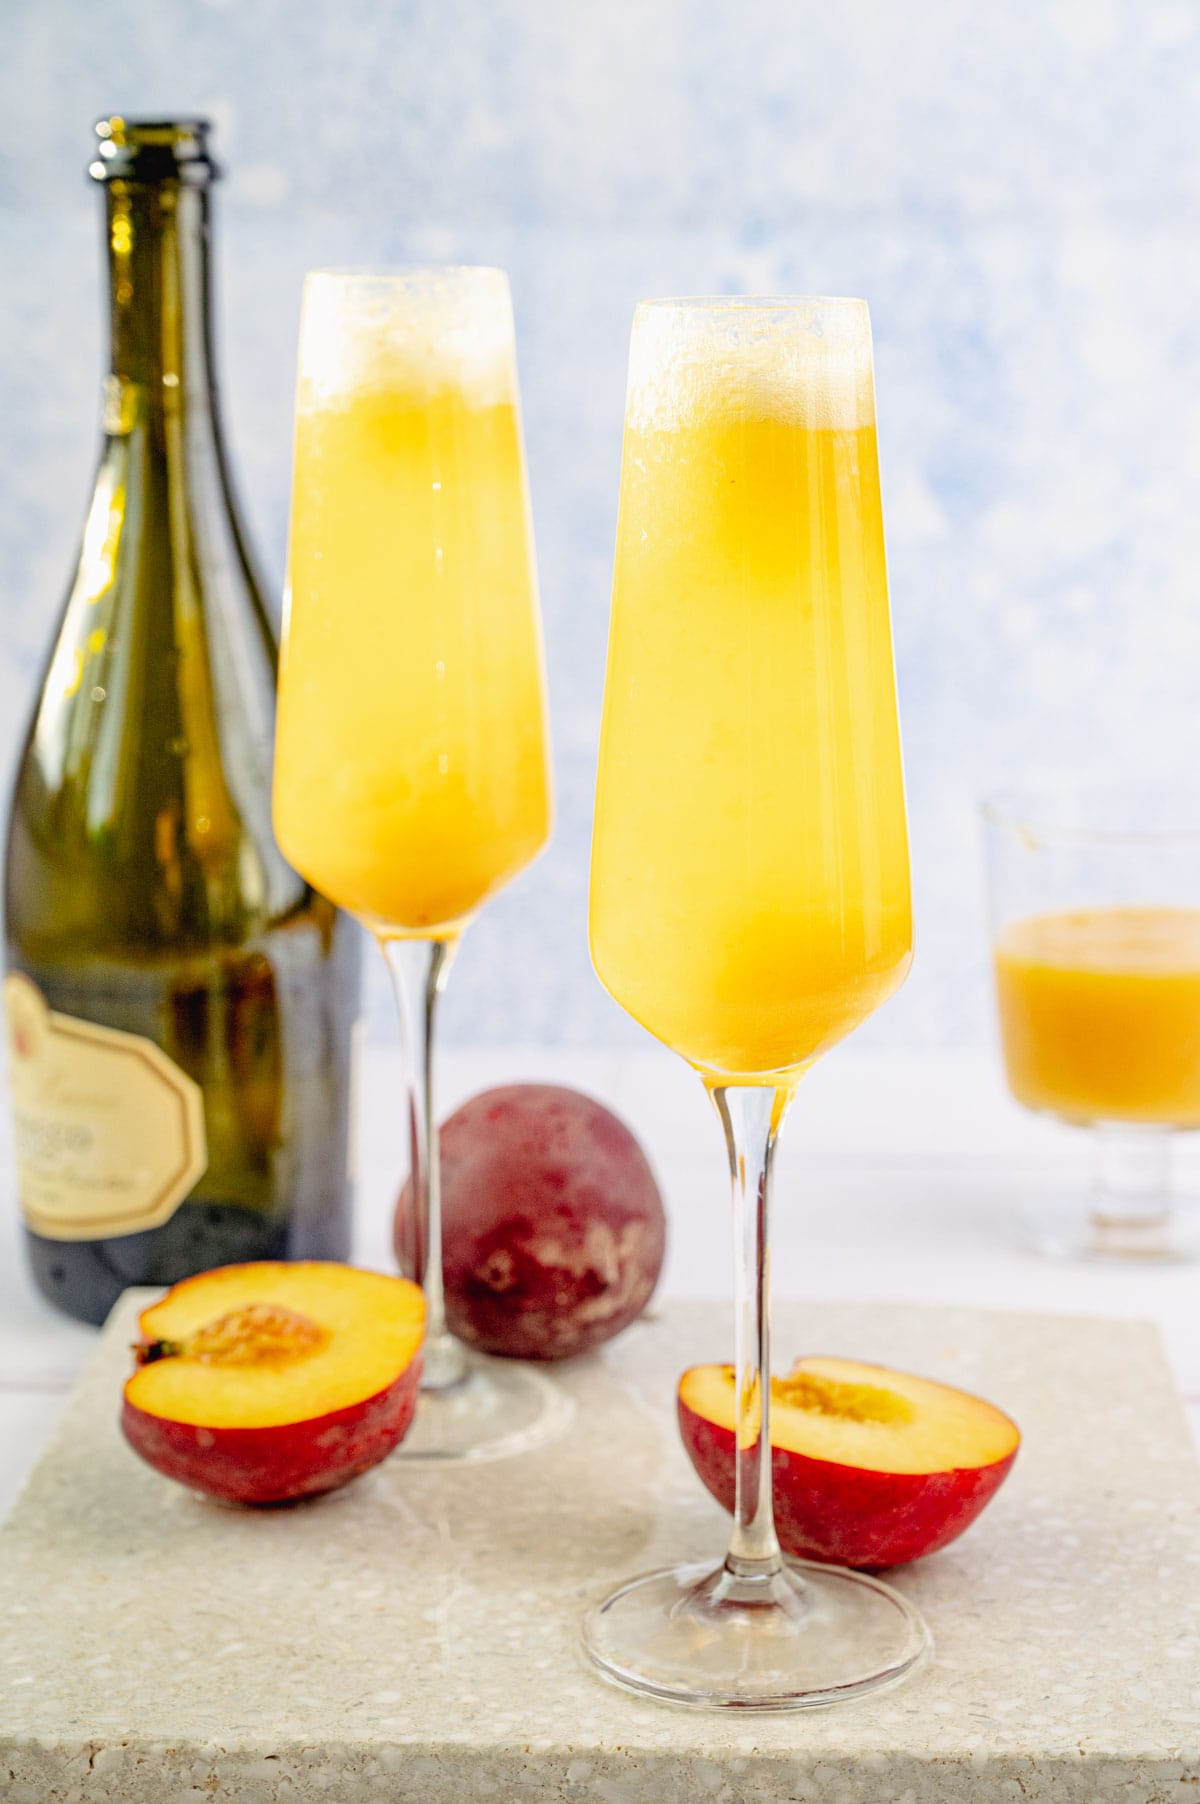 Two champagne glasses with peach bellini on a stone board. Prosecco bottle in the background.